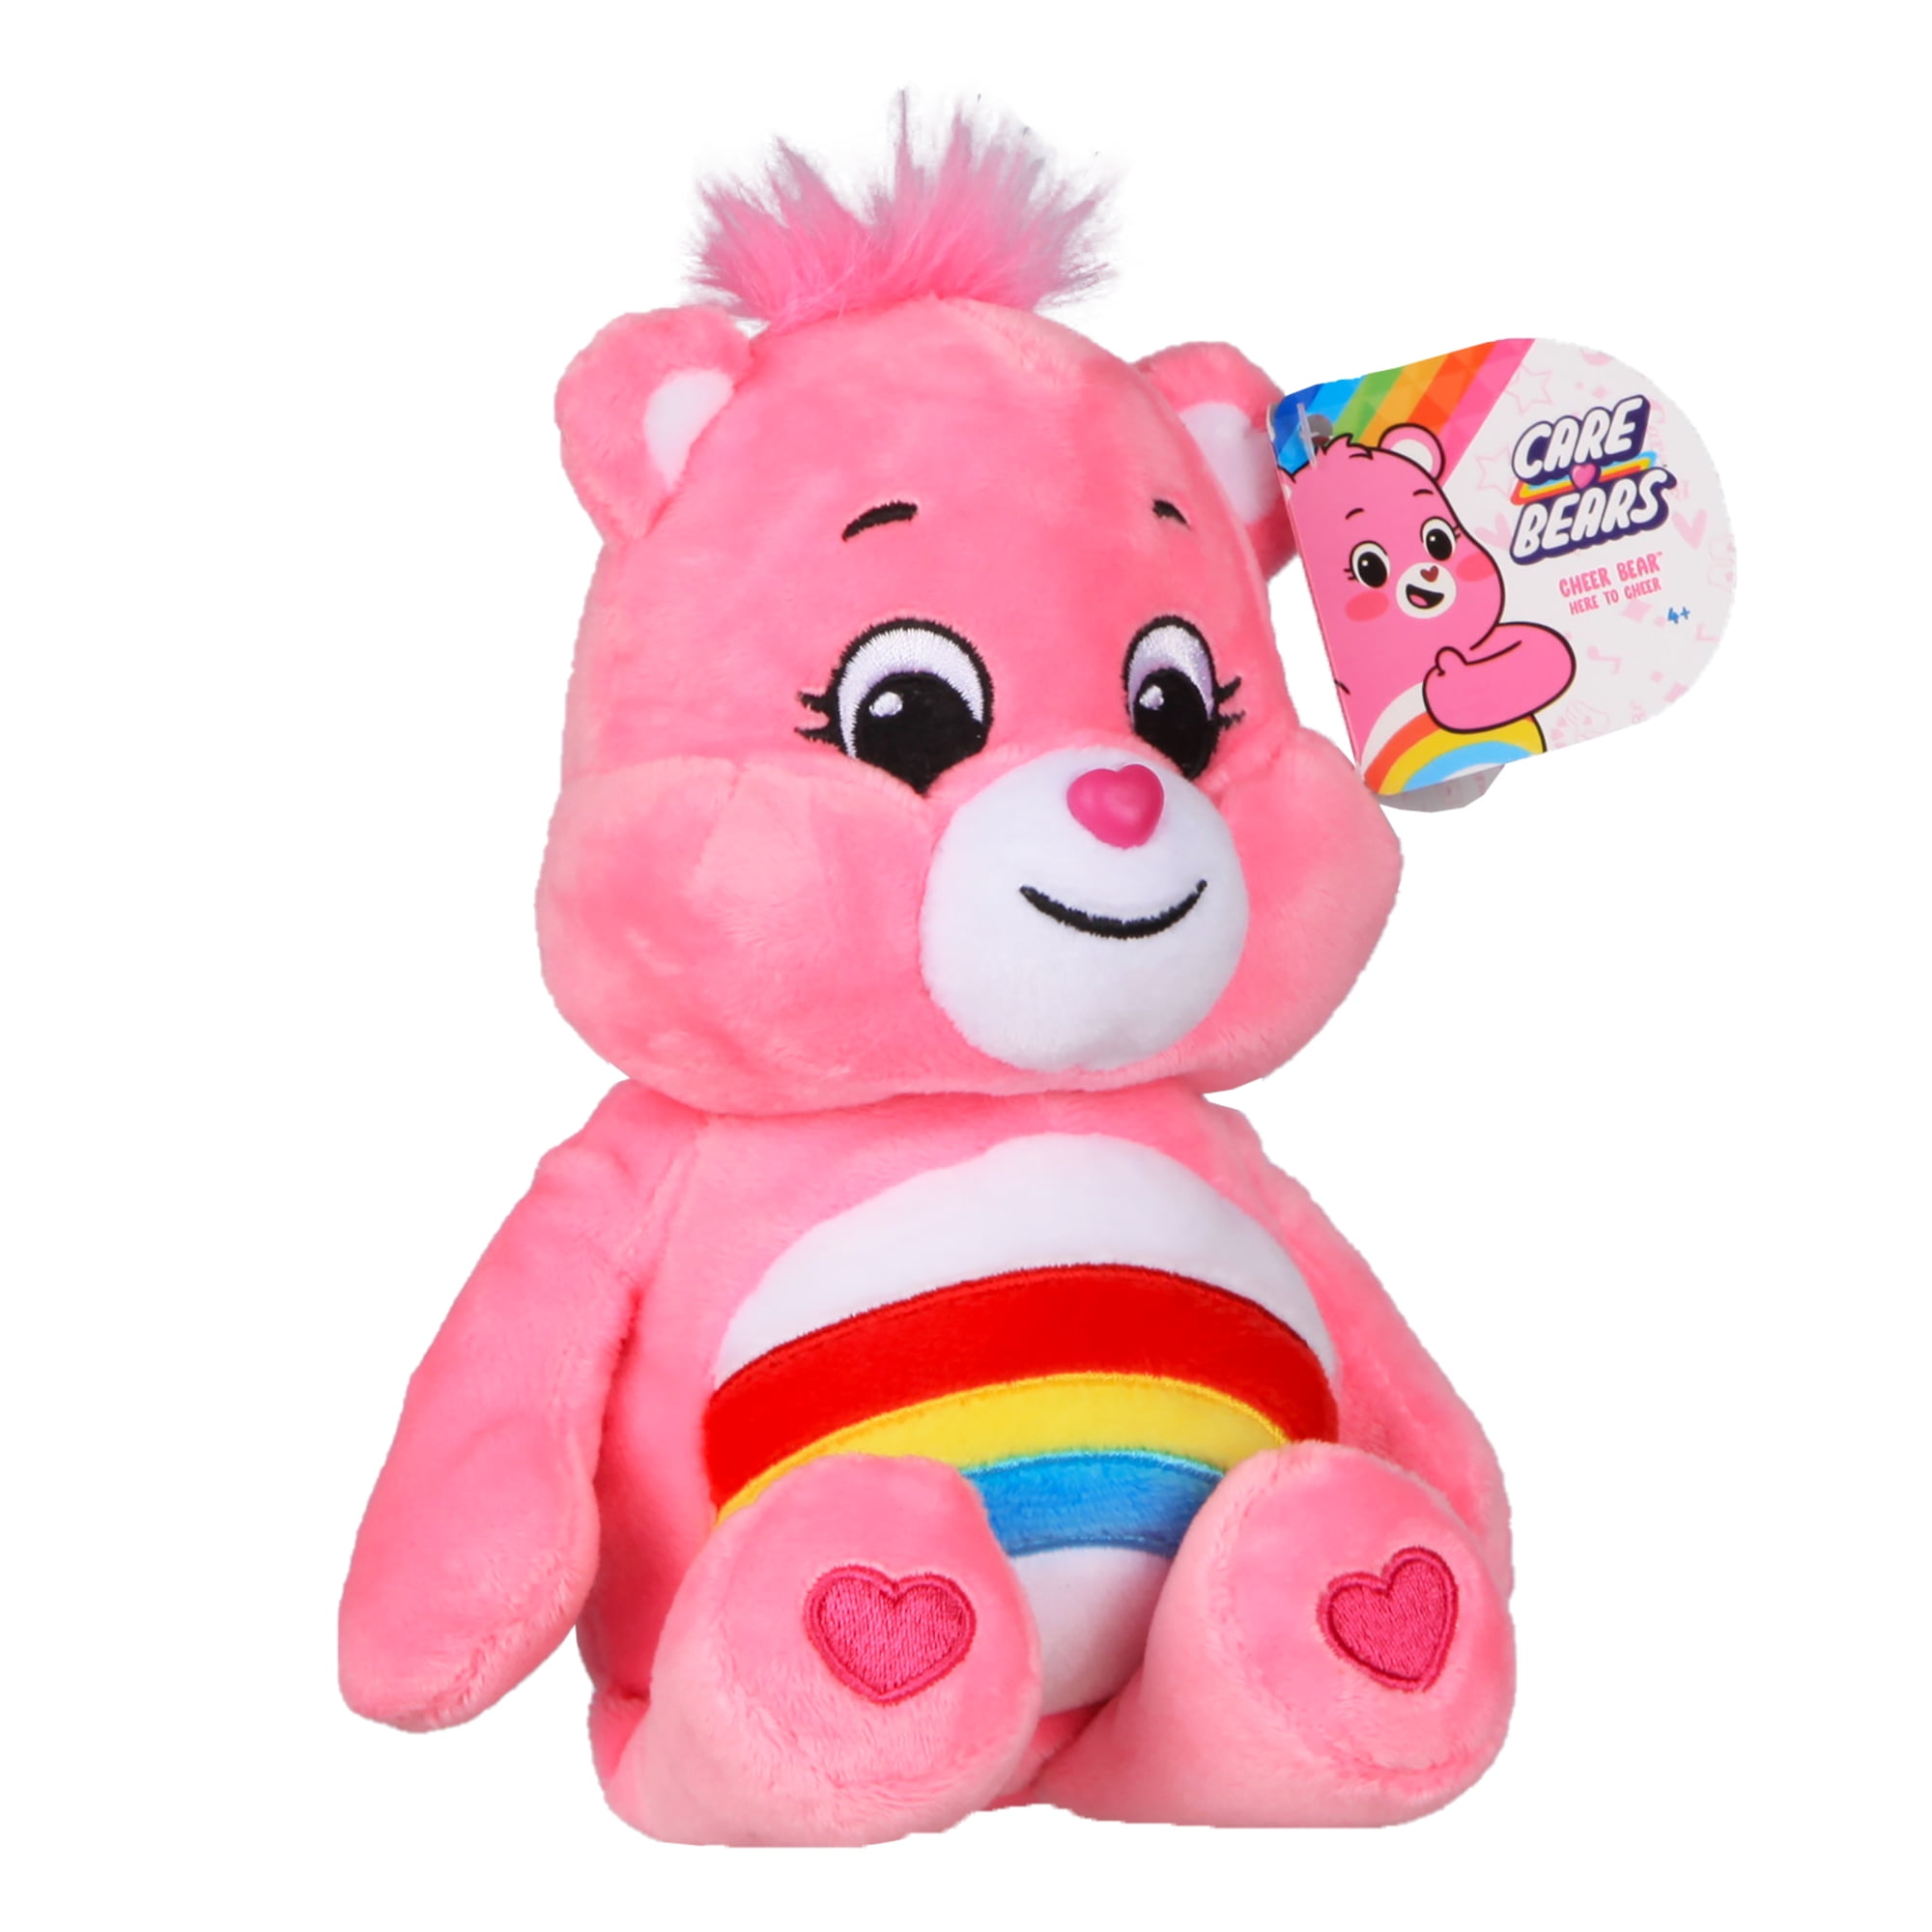 Care Bears Cheer Bear 9" Bean Plush Here To Cheer New 2020 Collect All 6 Of Them 